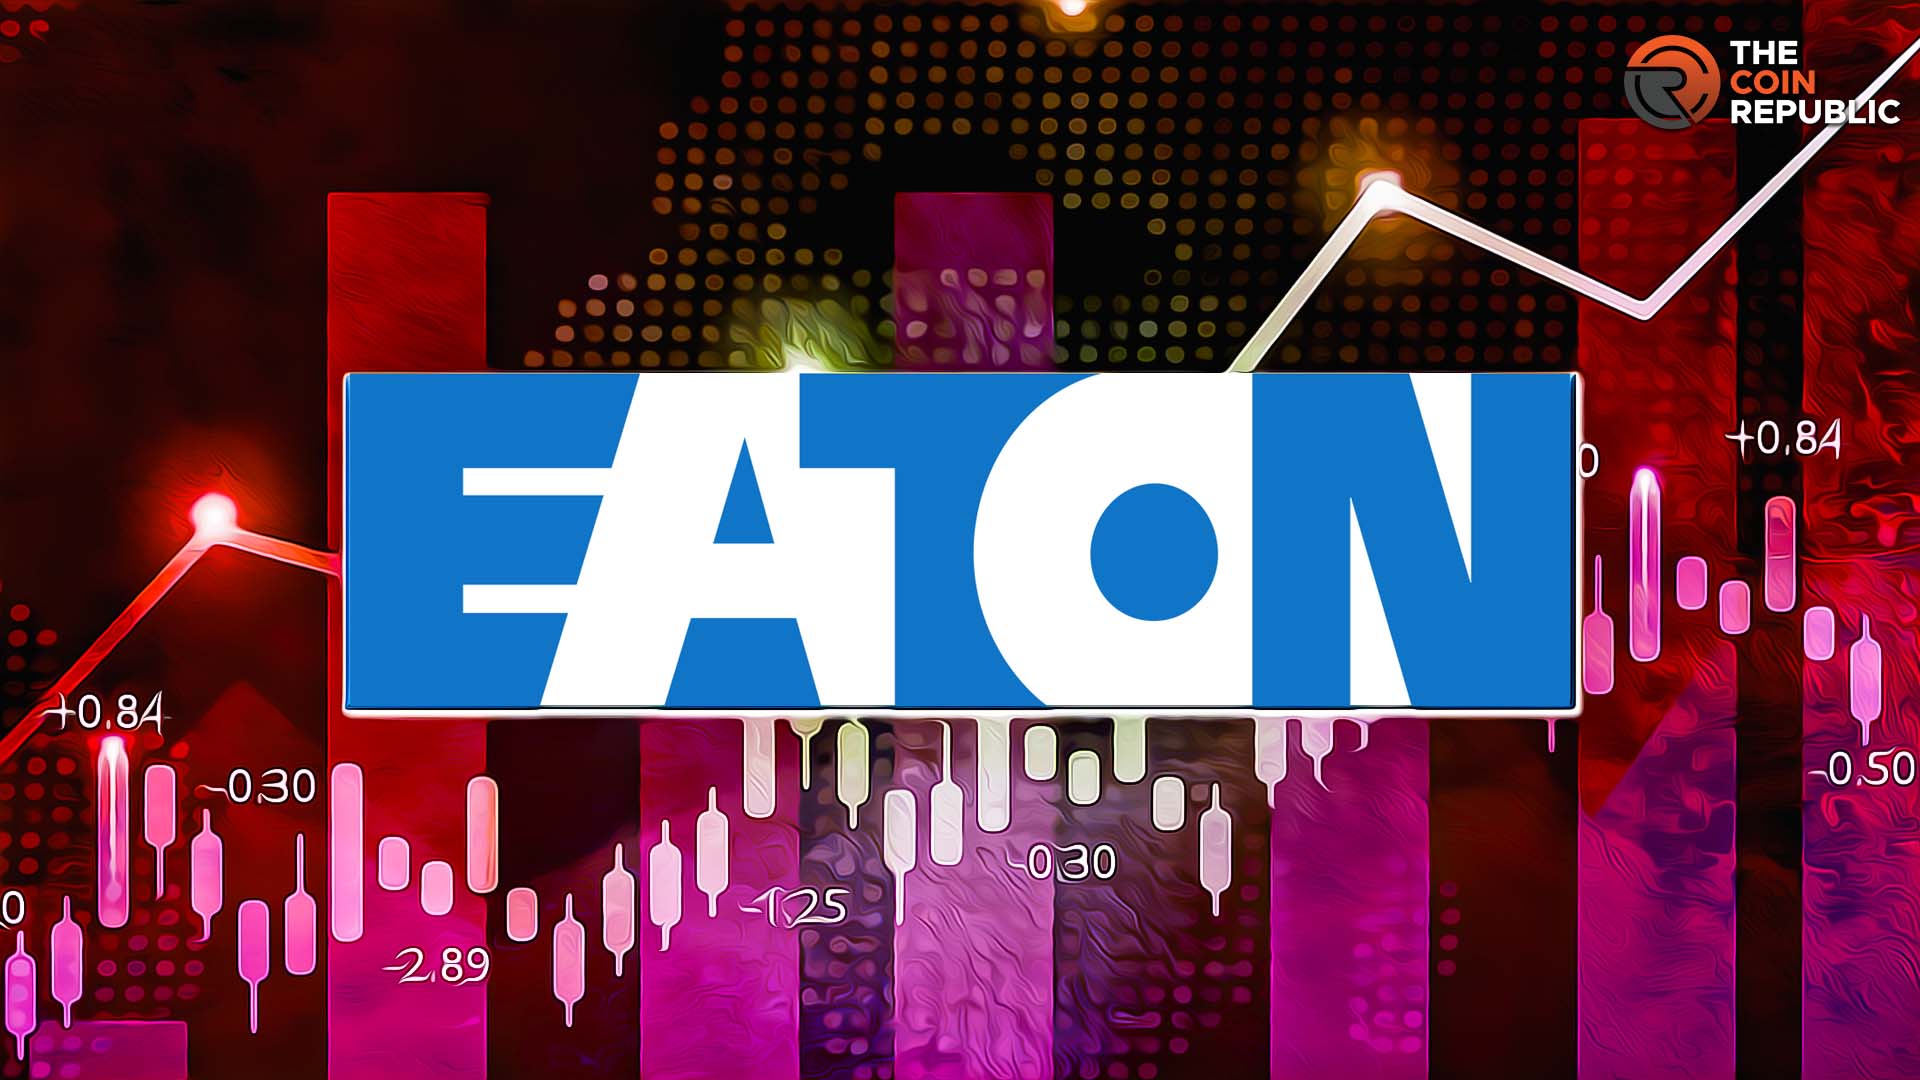 Eaton Corp. PLC (NYSE: ETN): ETN Stock Price Up 23% Year to Date!